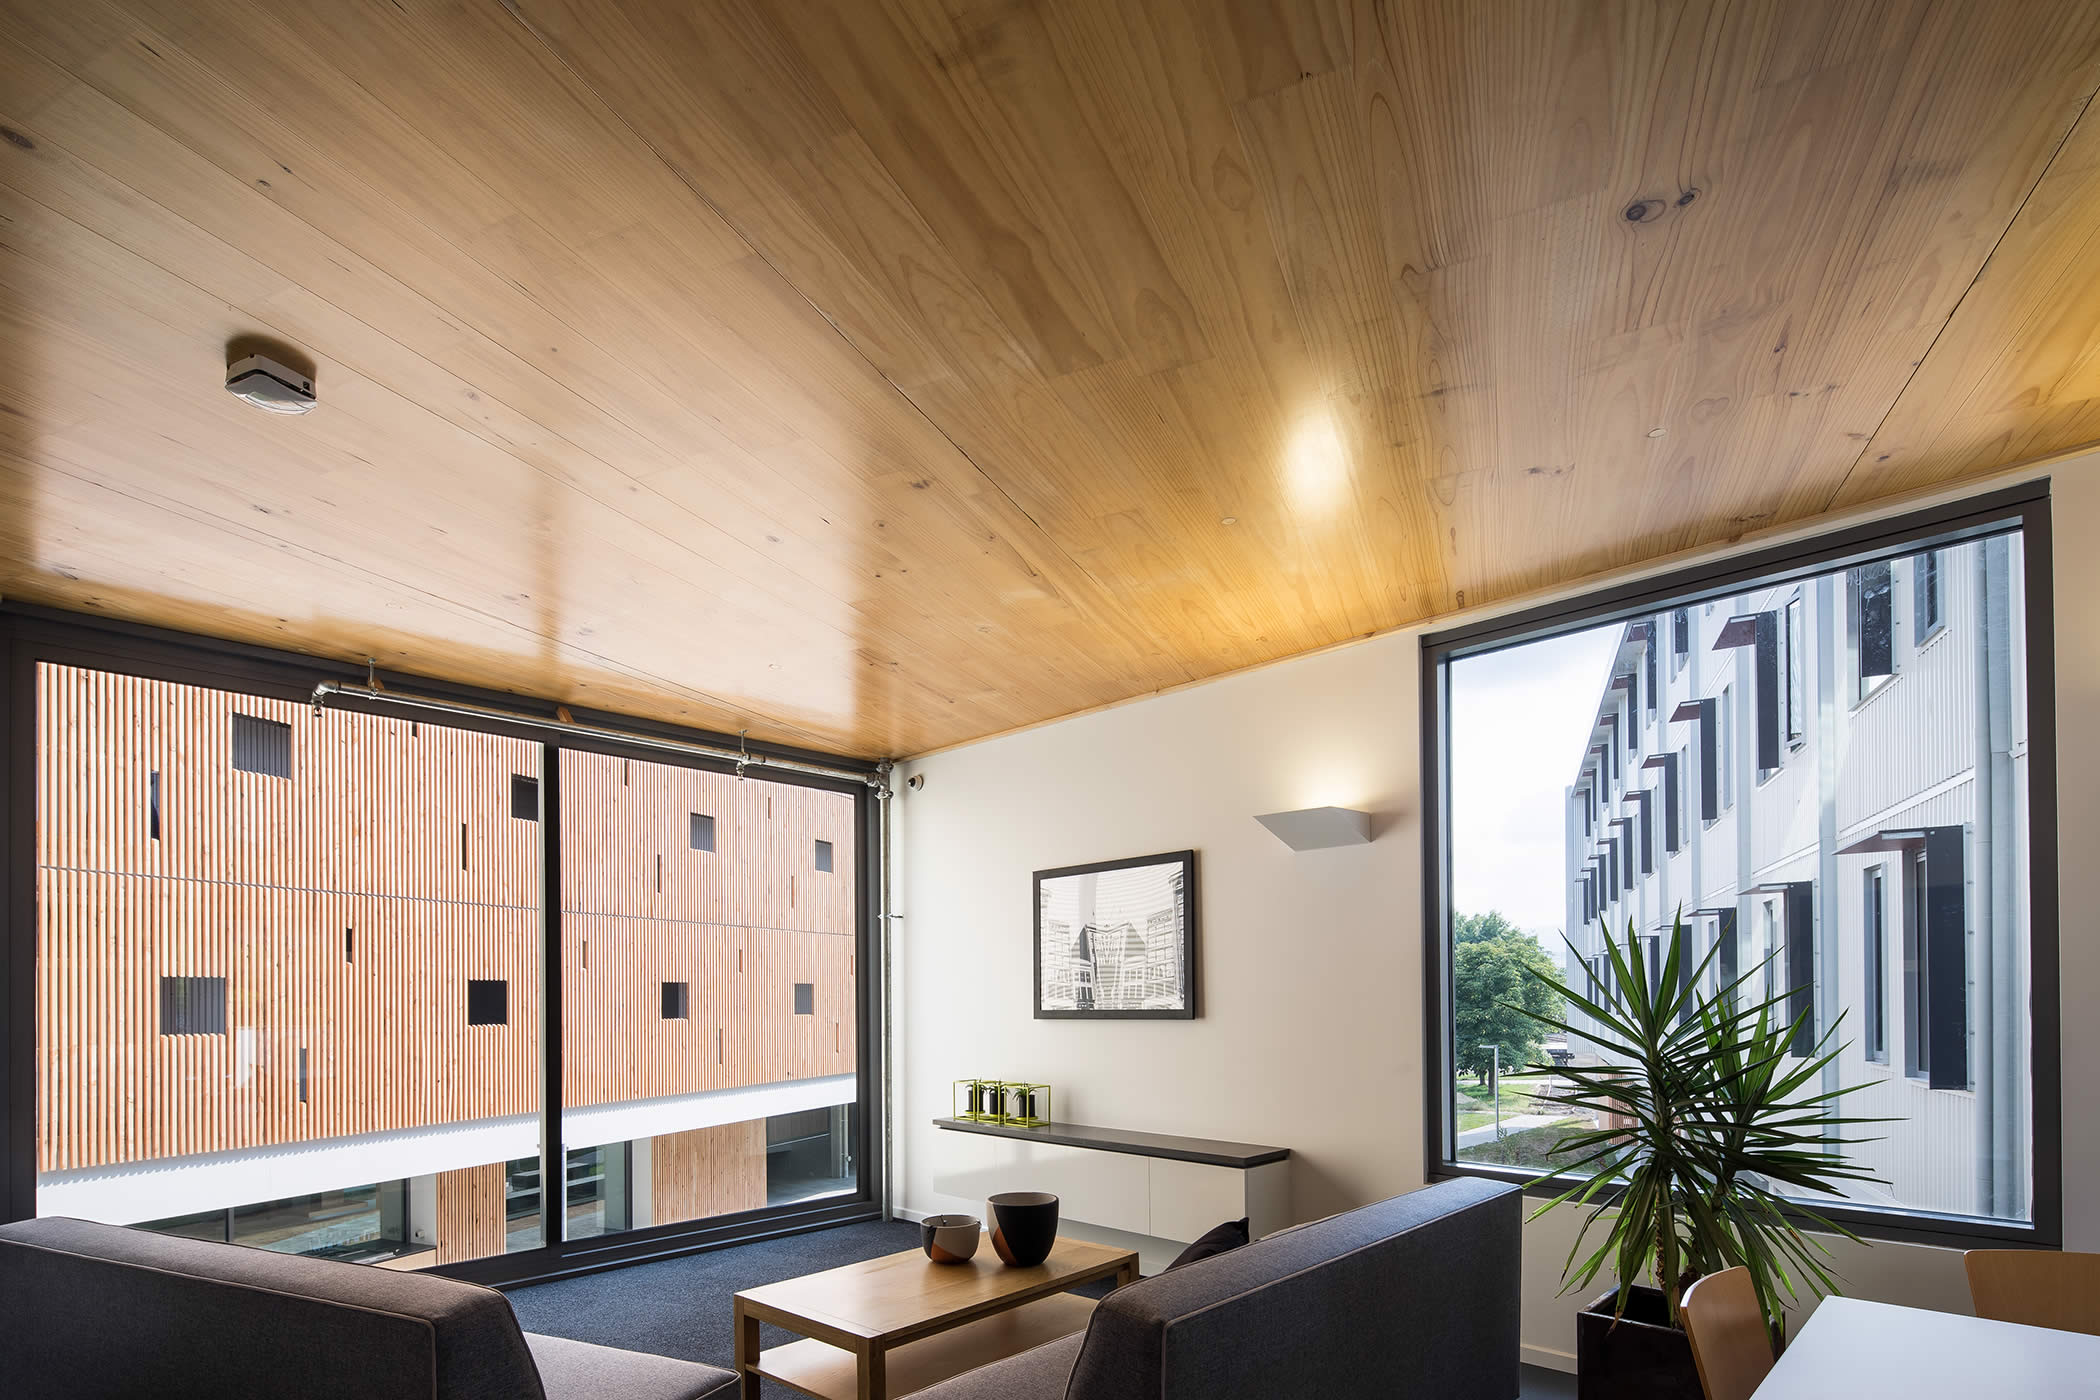 UTAS Inveresk Student Residences, Tasmania: Prefabricated lightweight framed timber construction was combined with structural cross laminated timber (CLT) expressed in corner common room interiors and the stairwells. Photo by Thomas Ryan.